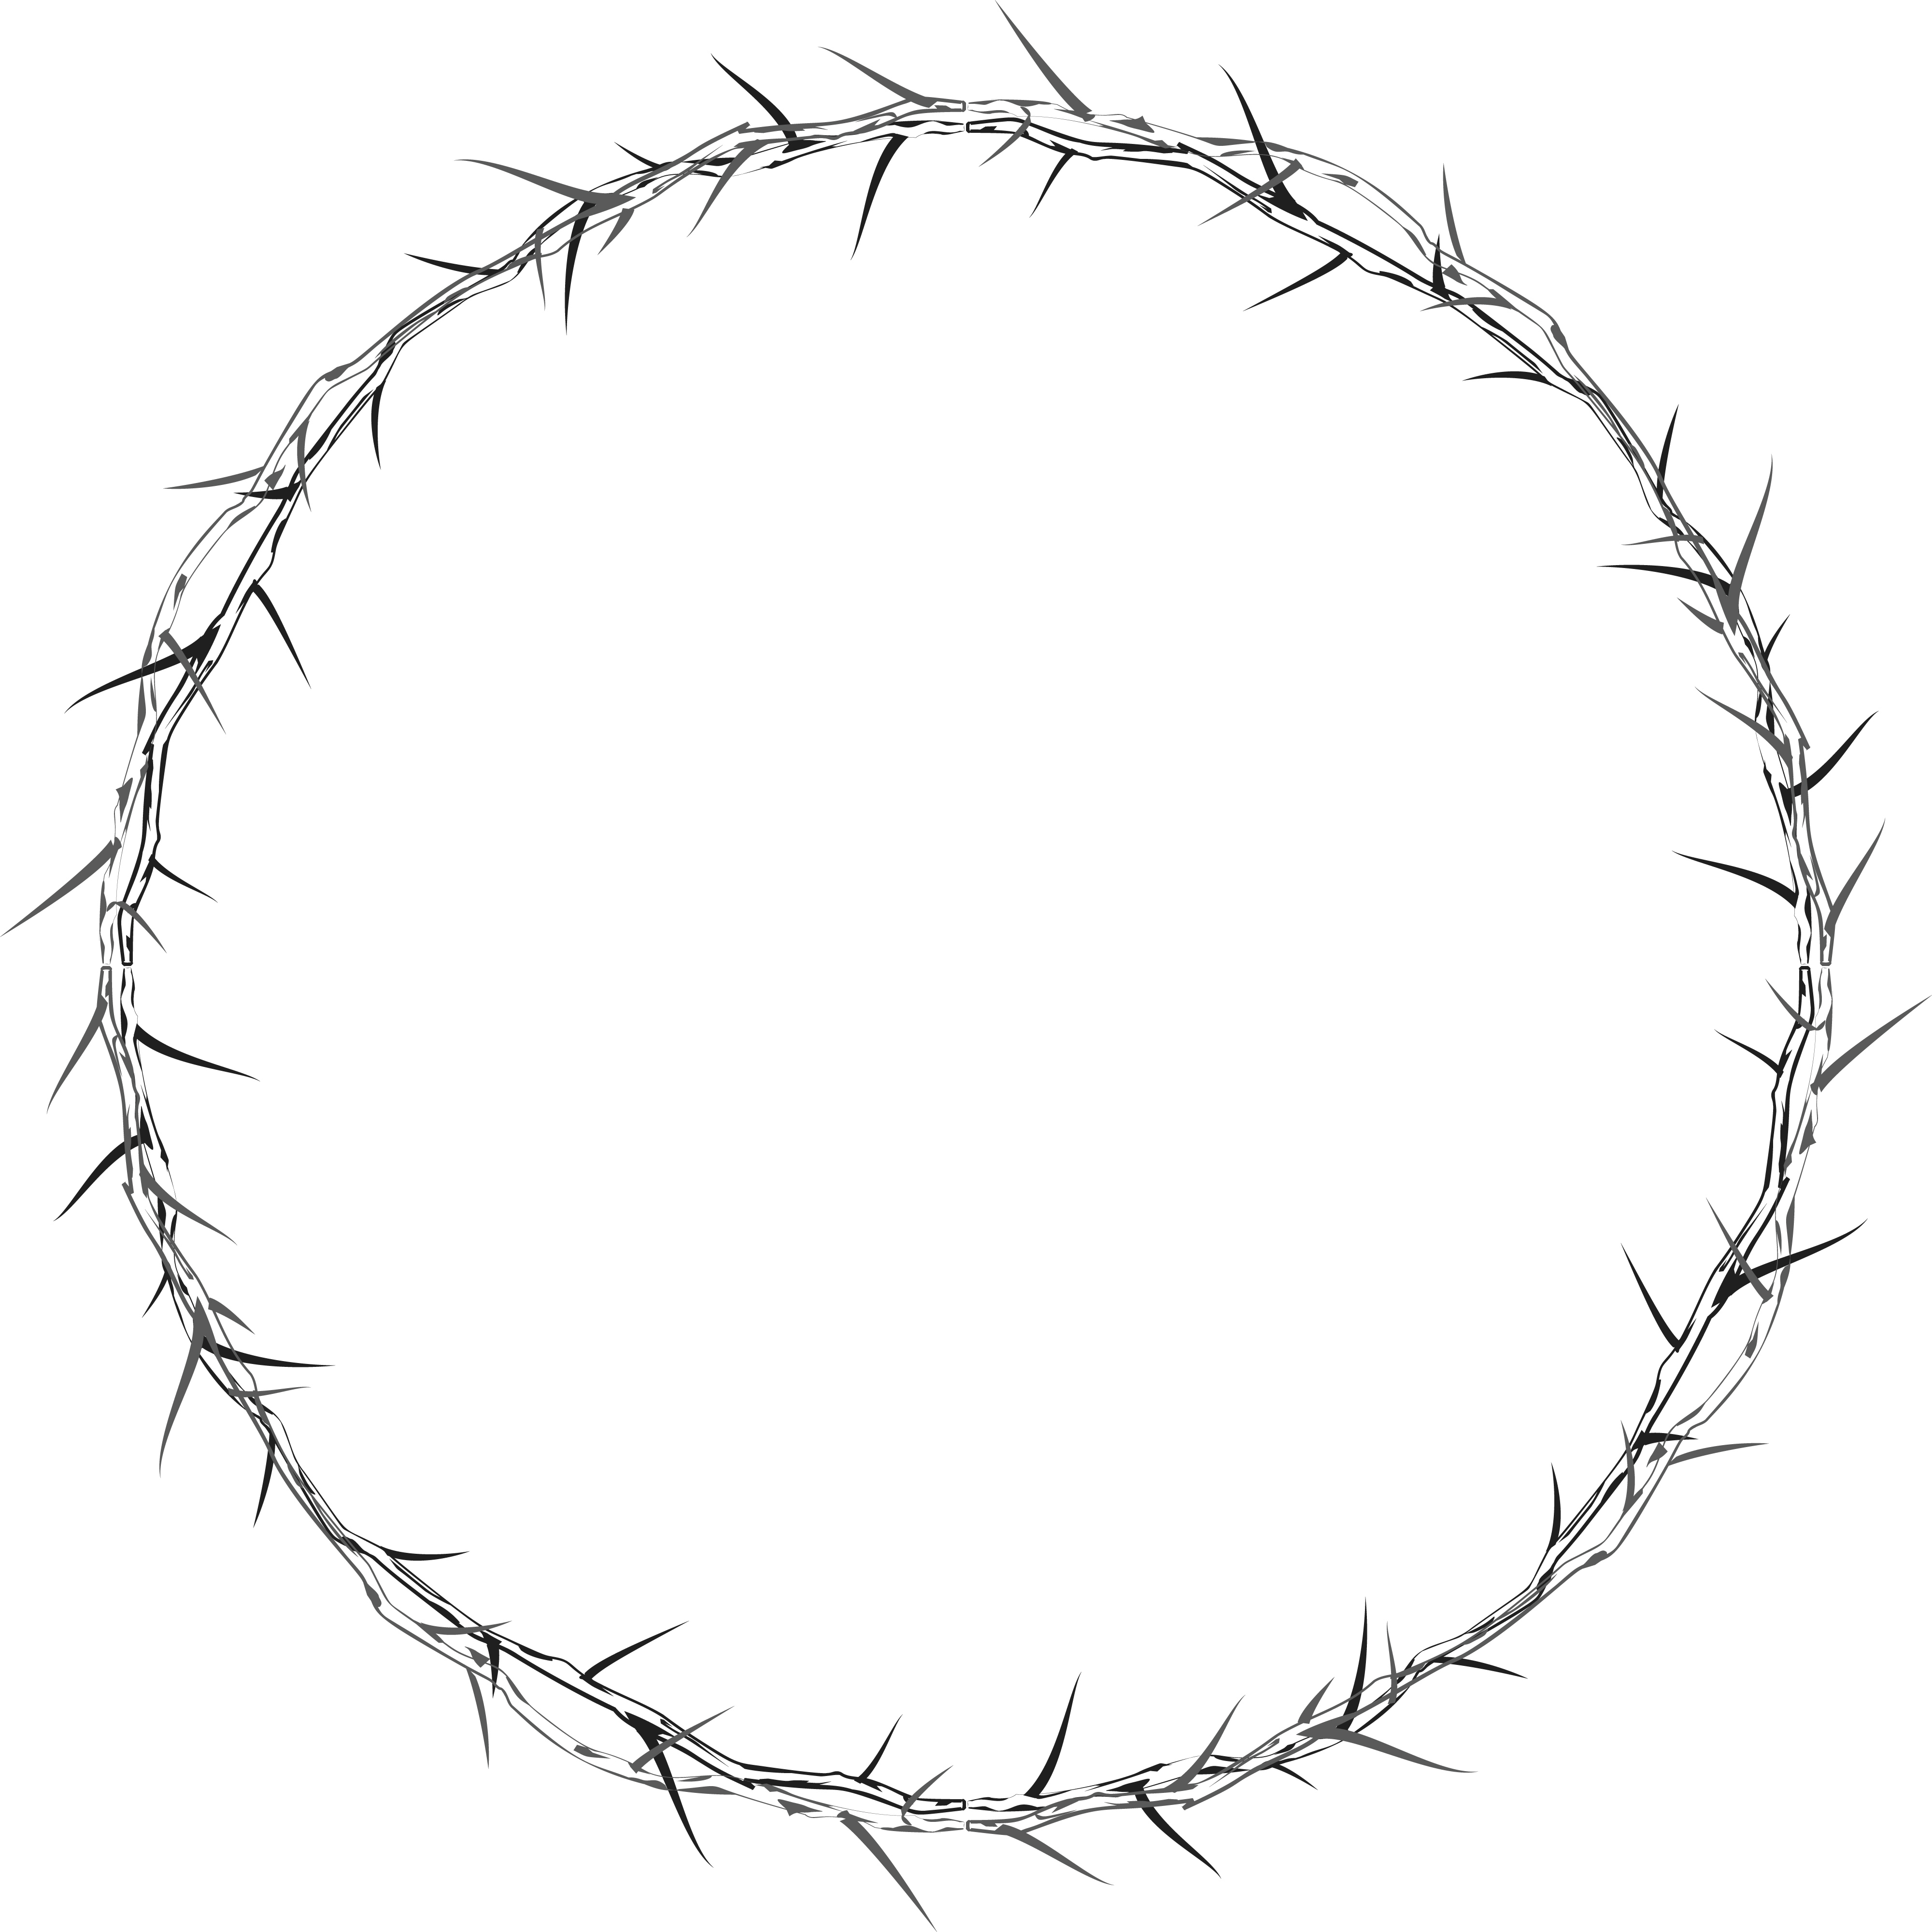 Download Free Clipart Of A crown or round frame made of thorns